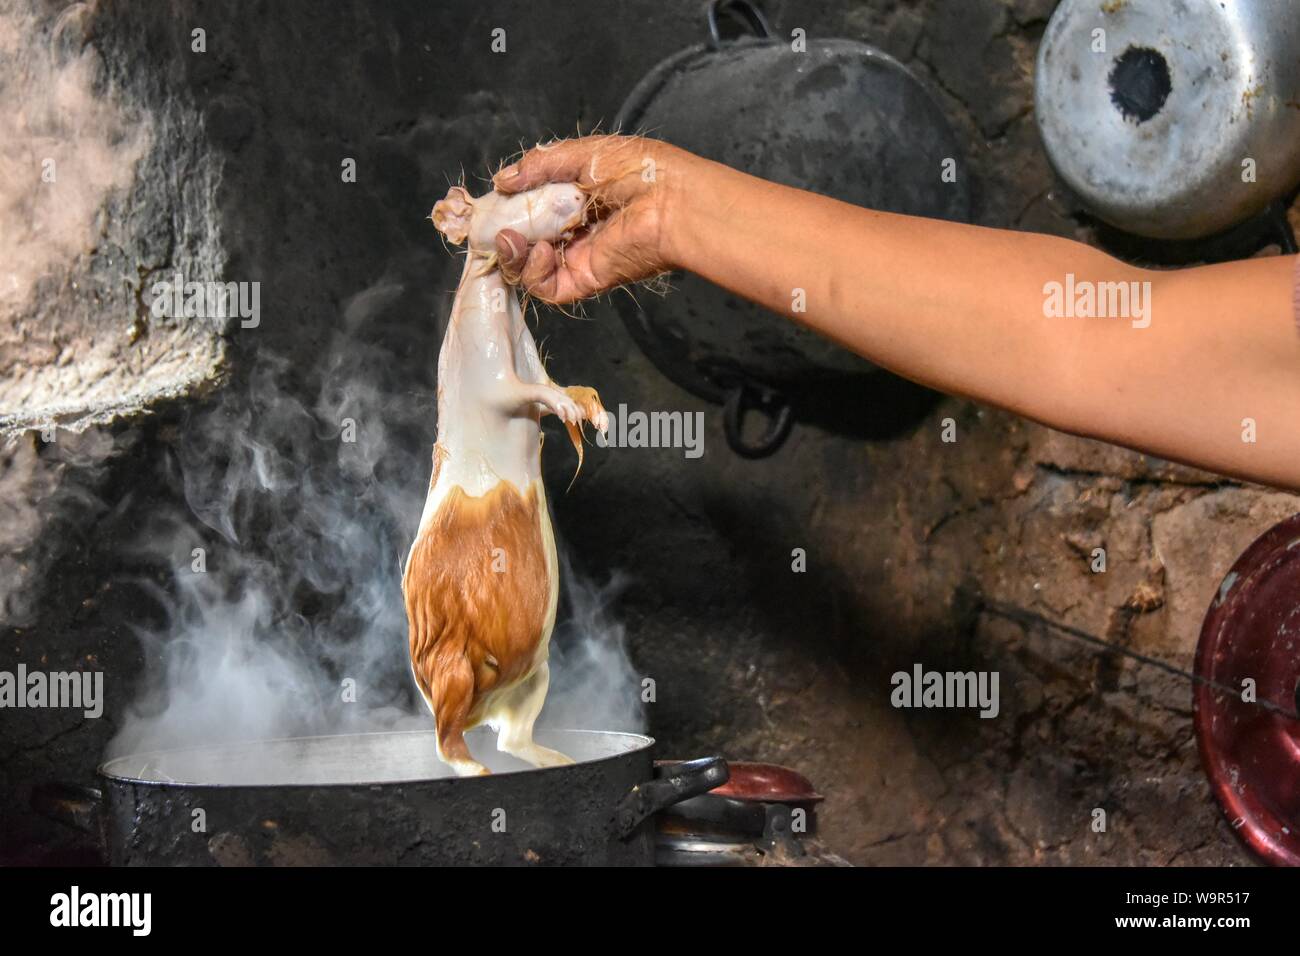 Local woman holding Cuy, giant guinea pig in a pot of boiling water for  depilation, preparing for preparation to traditional Cuy dish, Cusco, Peru  Stock Photo - Alamy